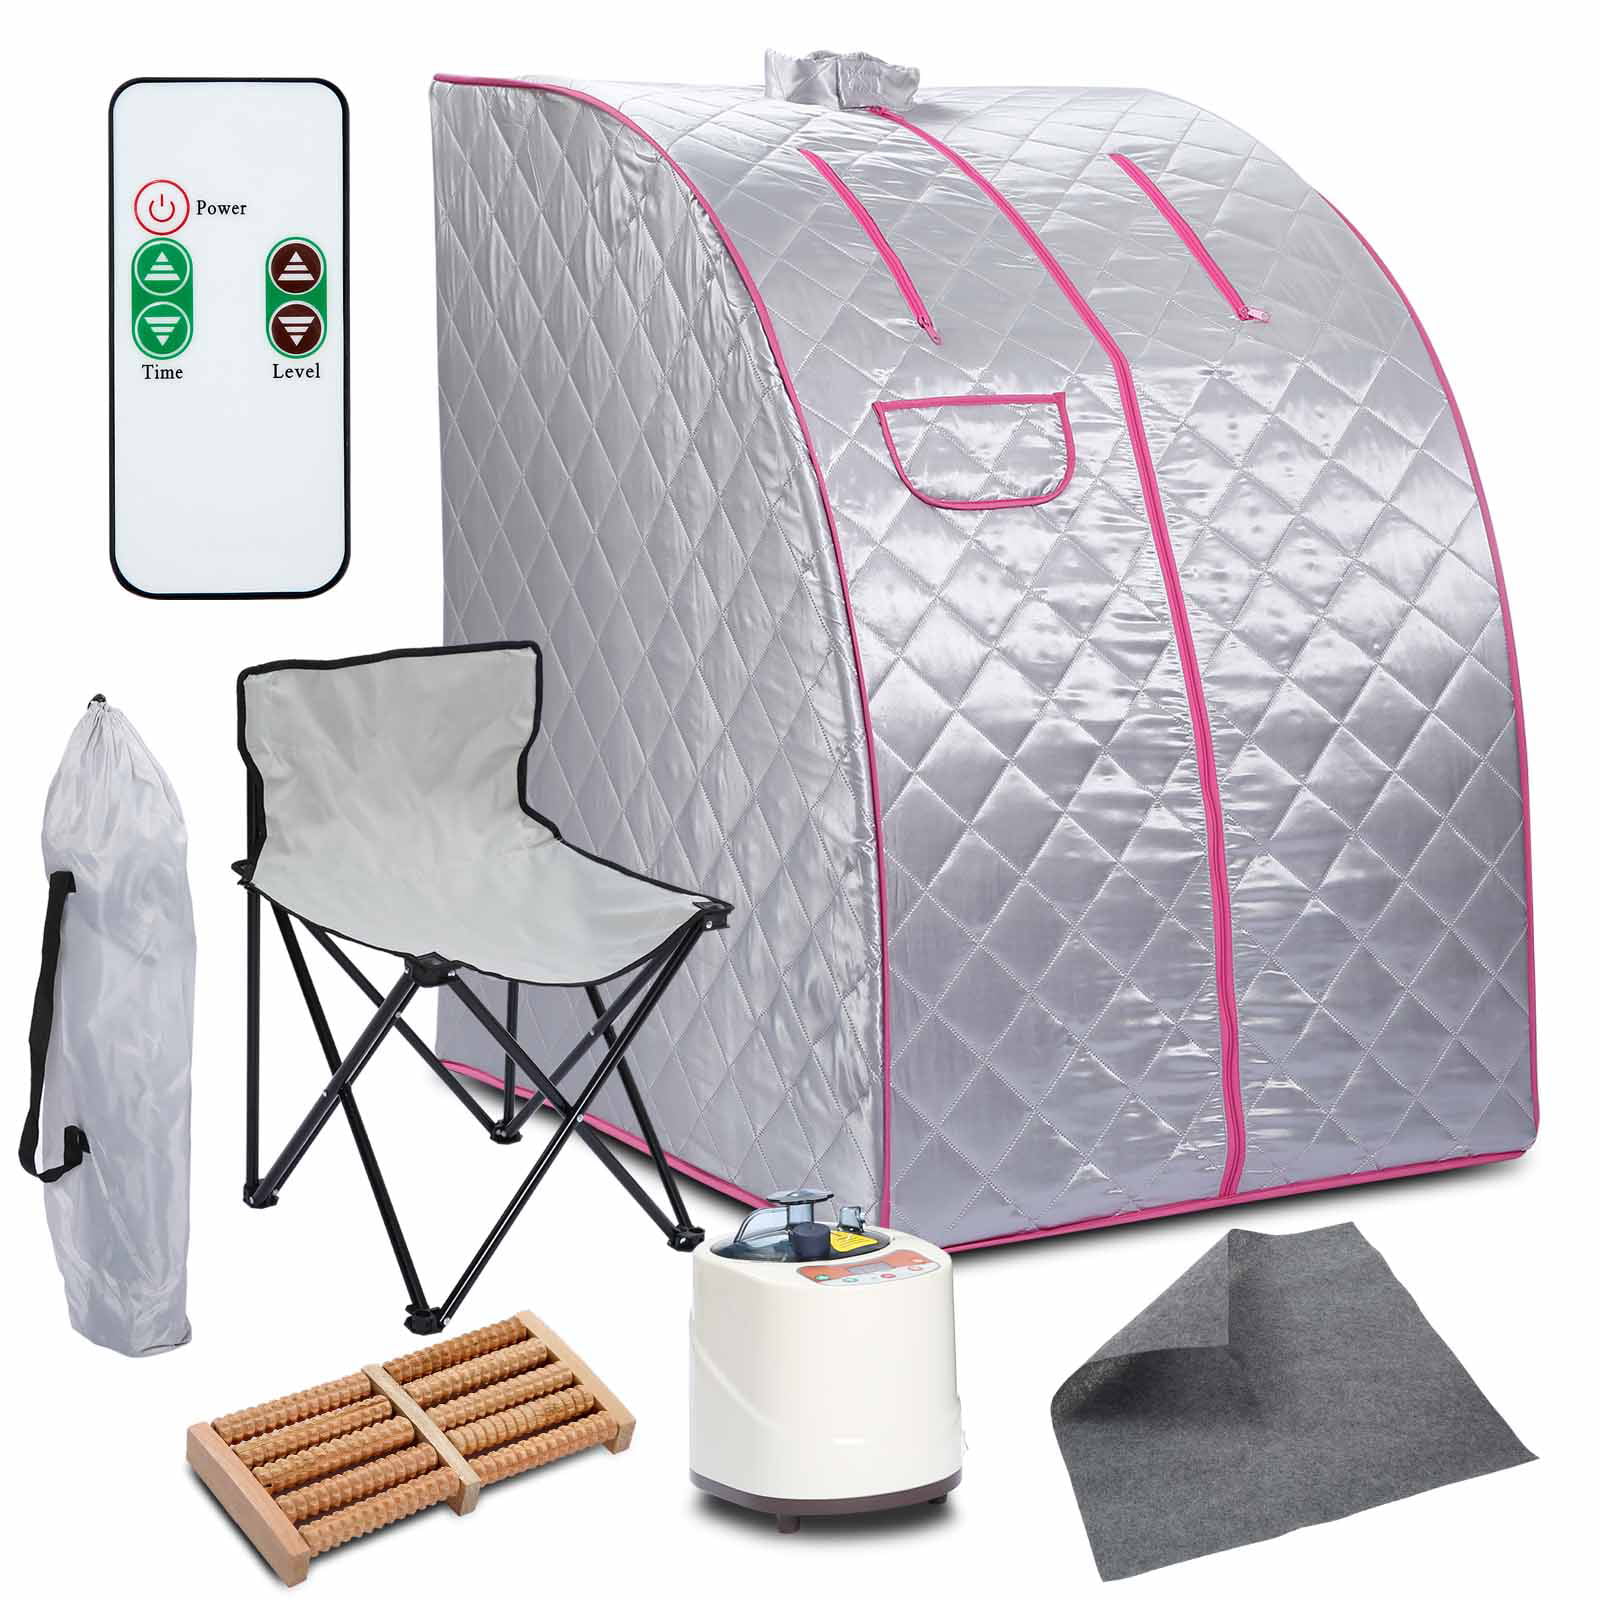 Details about   NEW 2L portable home Steam Sauna Spa tent folding Silver 